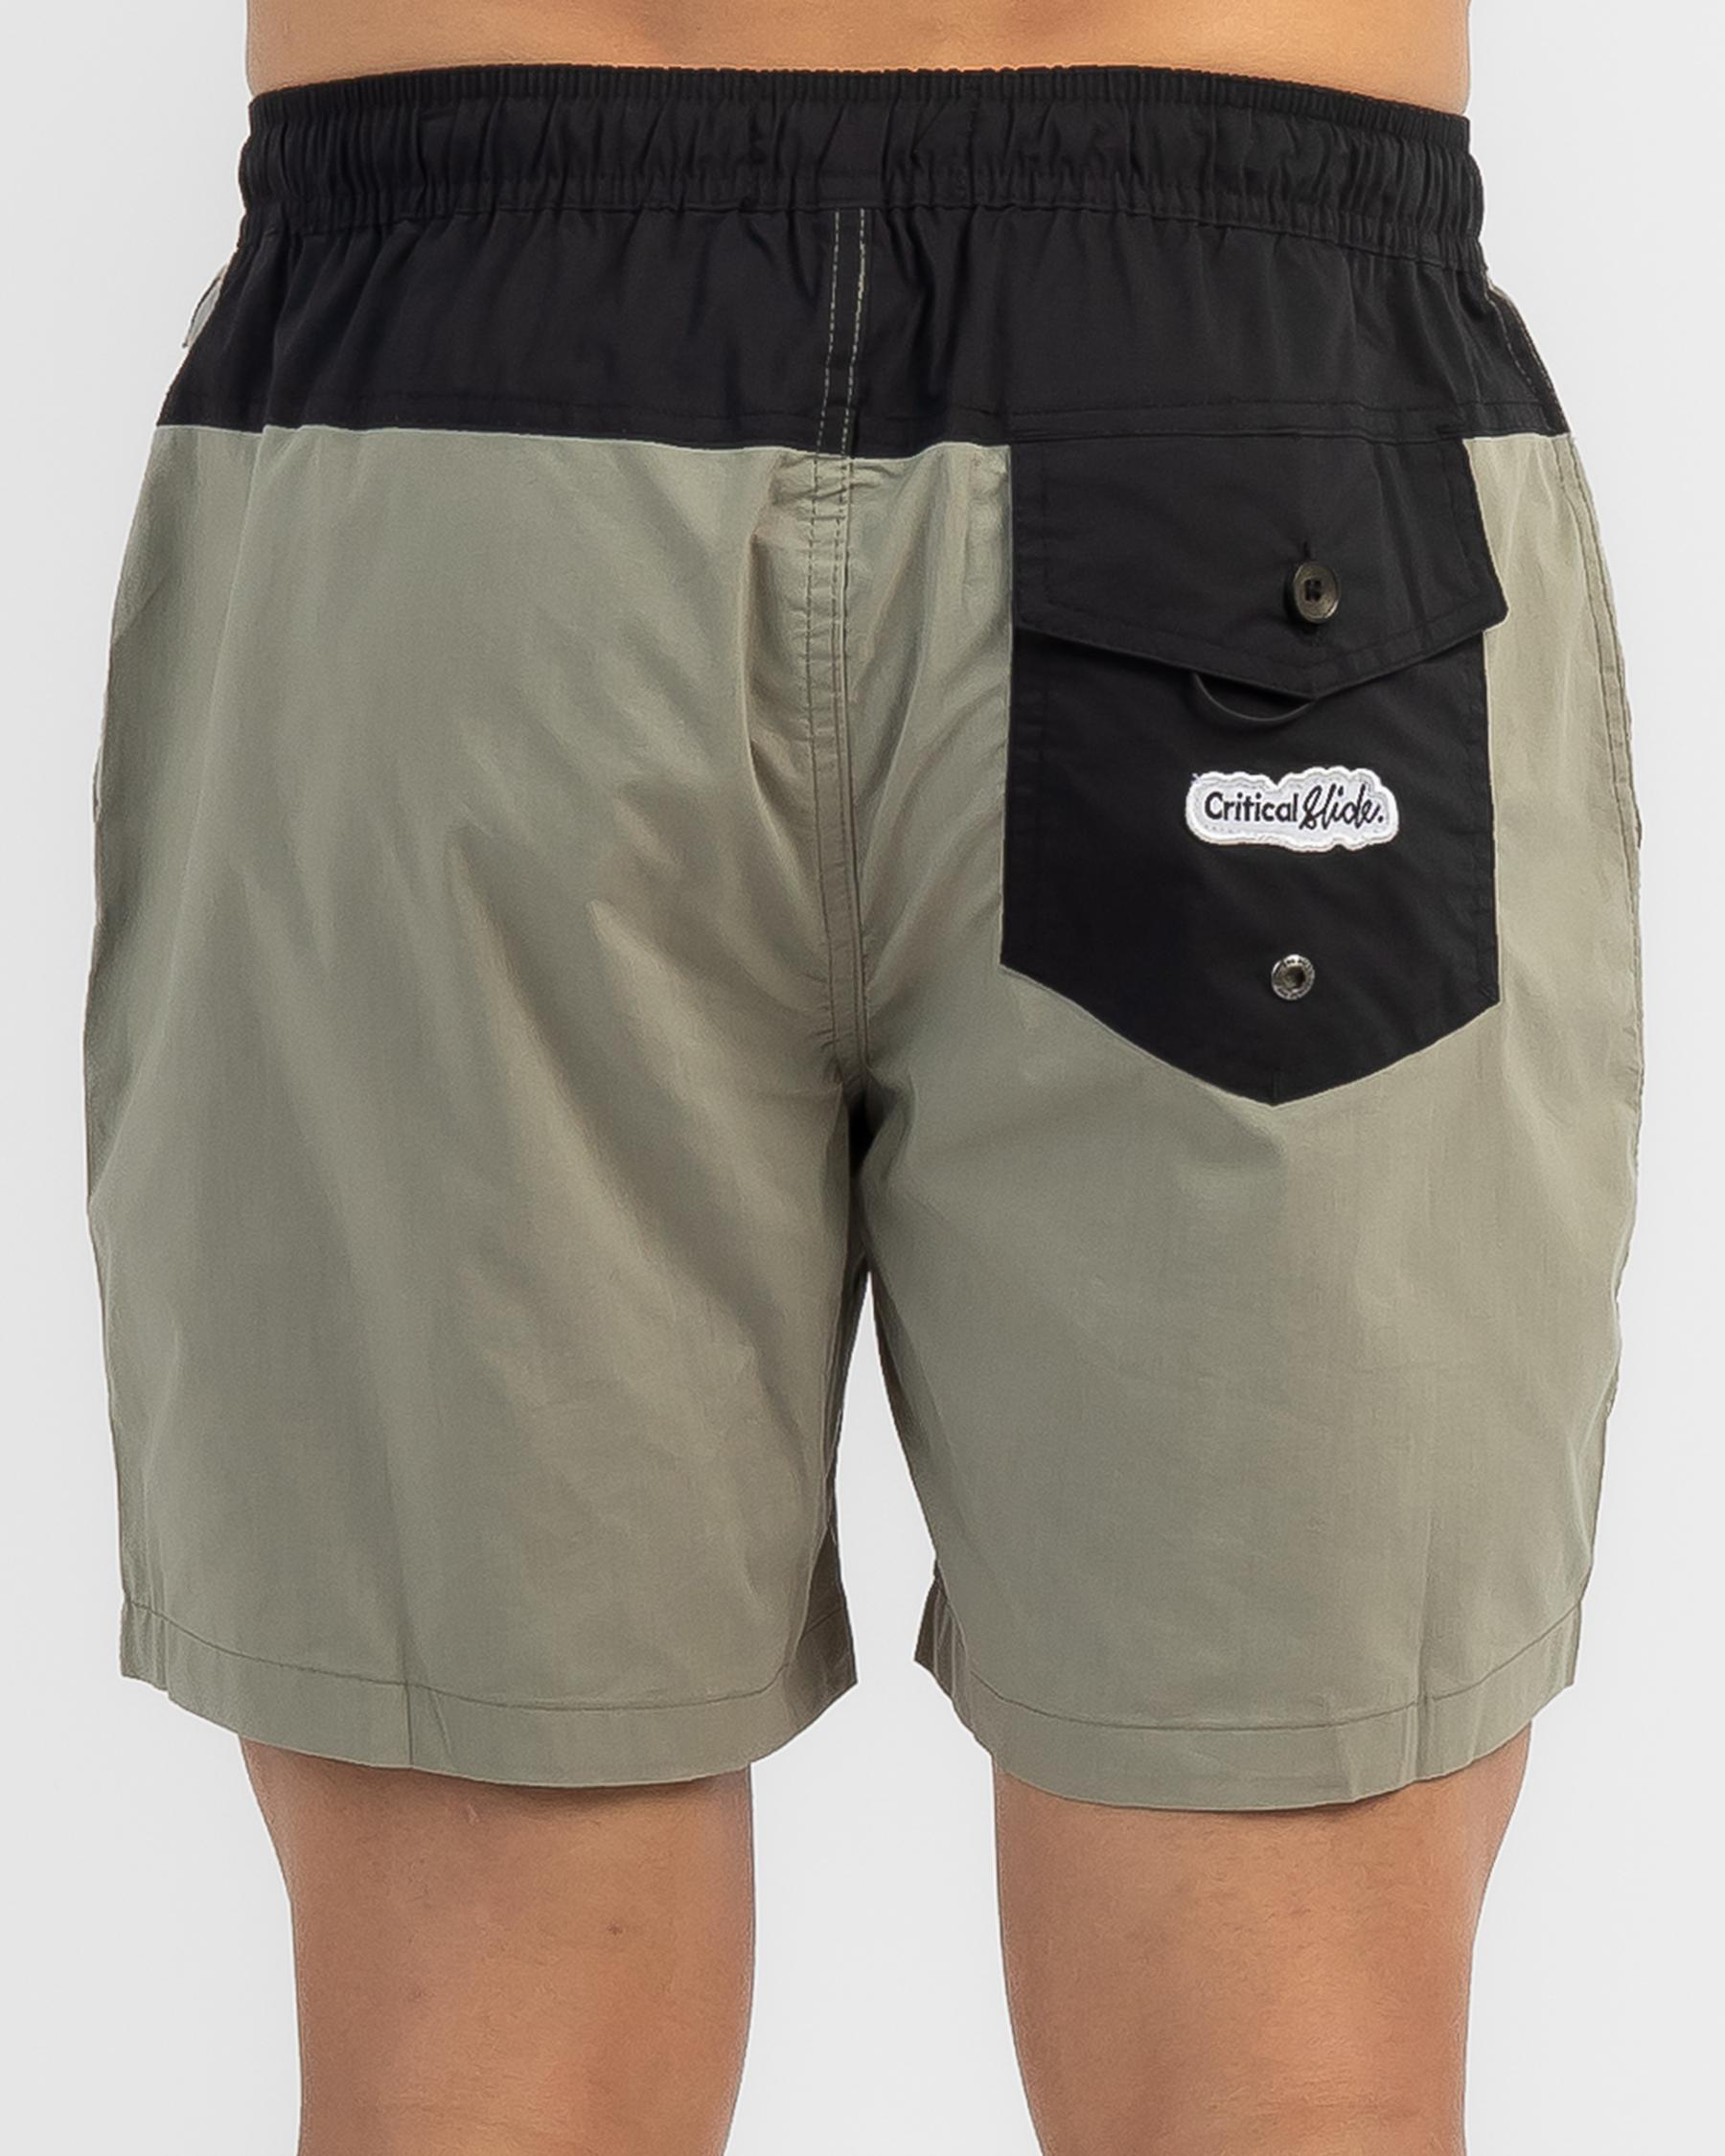 Shop The Critical Slide Society Plain Jane Trunk Shorts In Fatigue ...